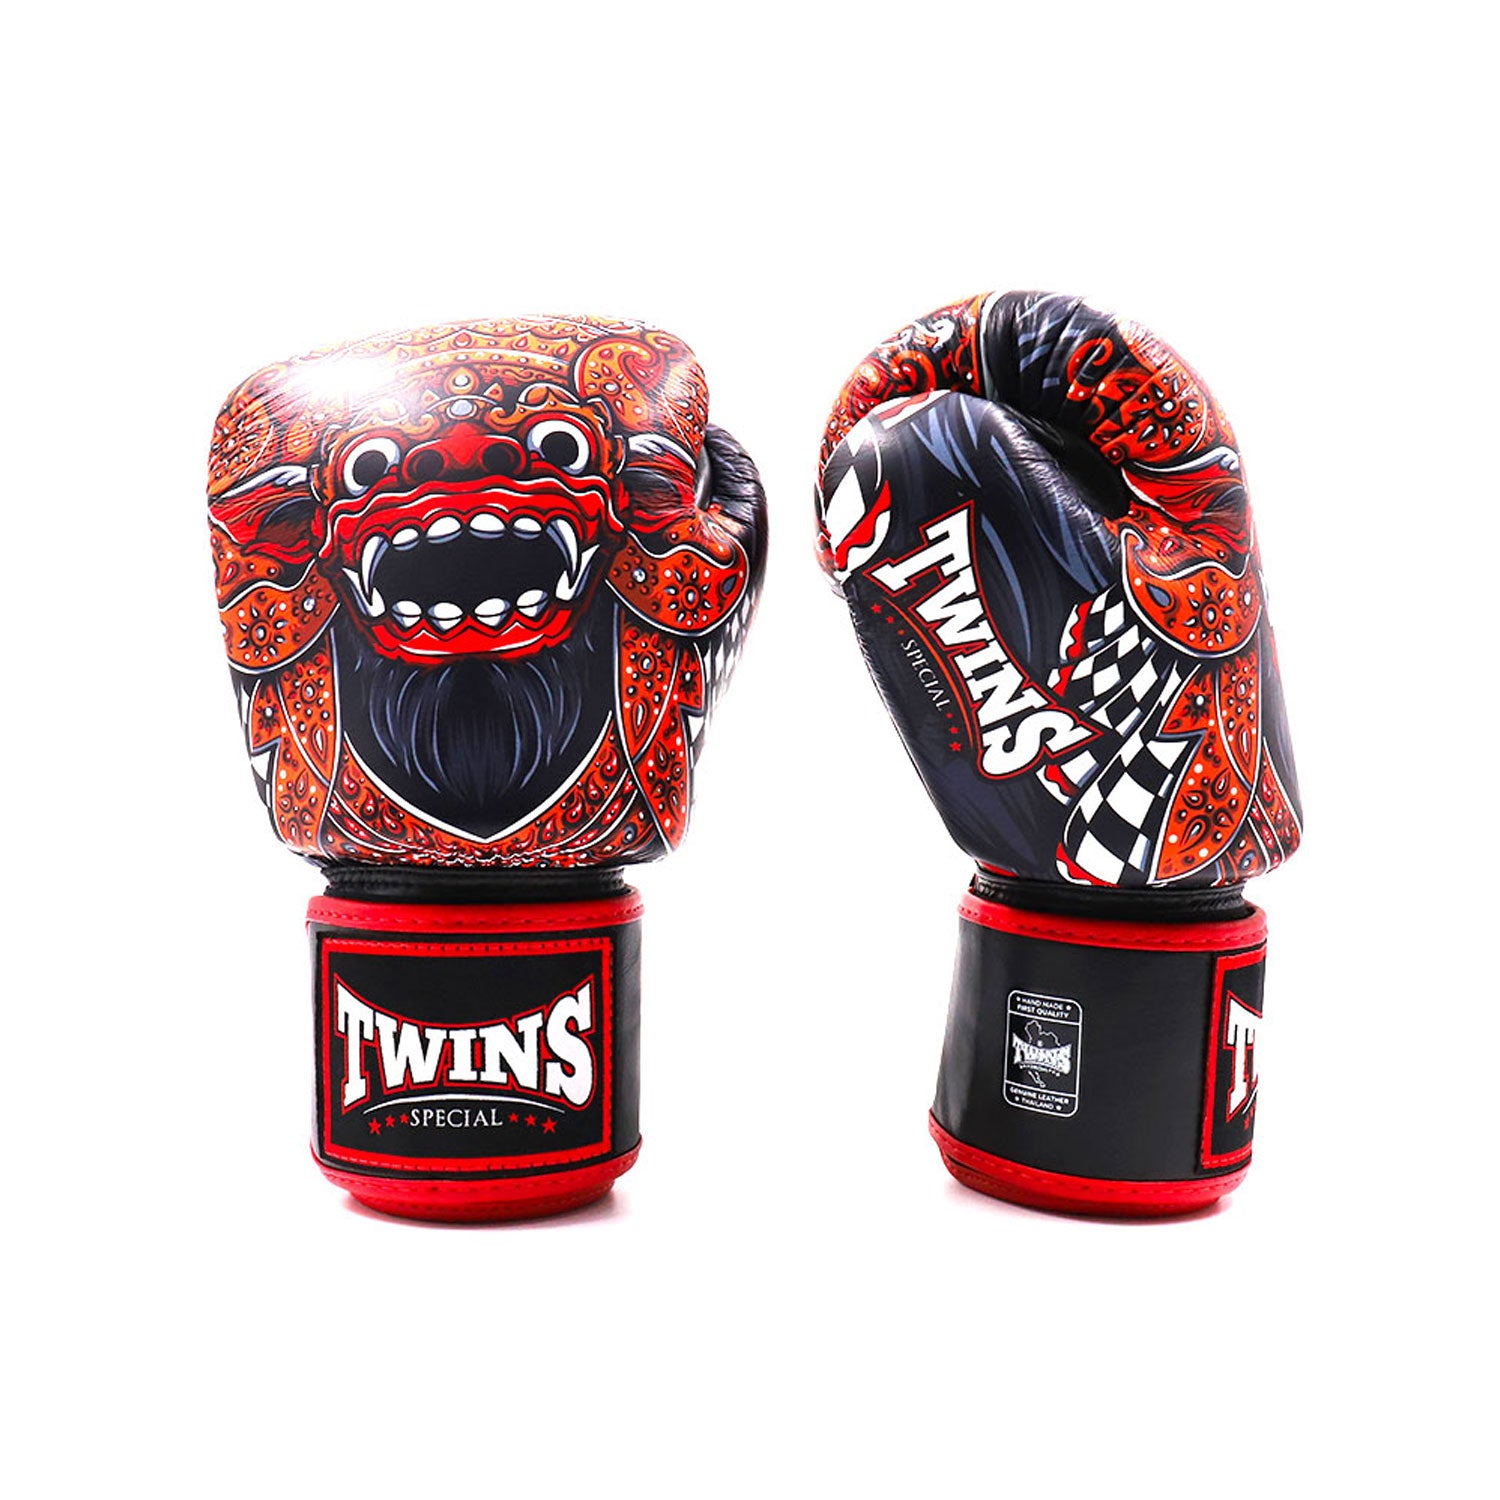 FBGVL3-59 Twins Barong Boxing Gloves Black-Red